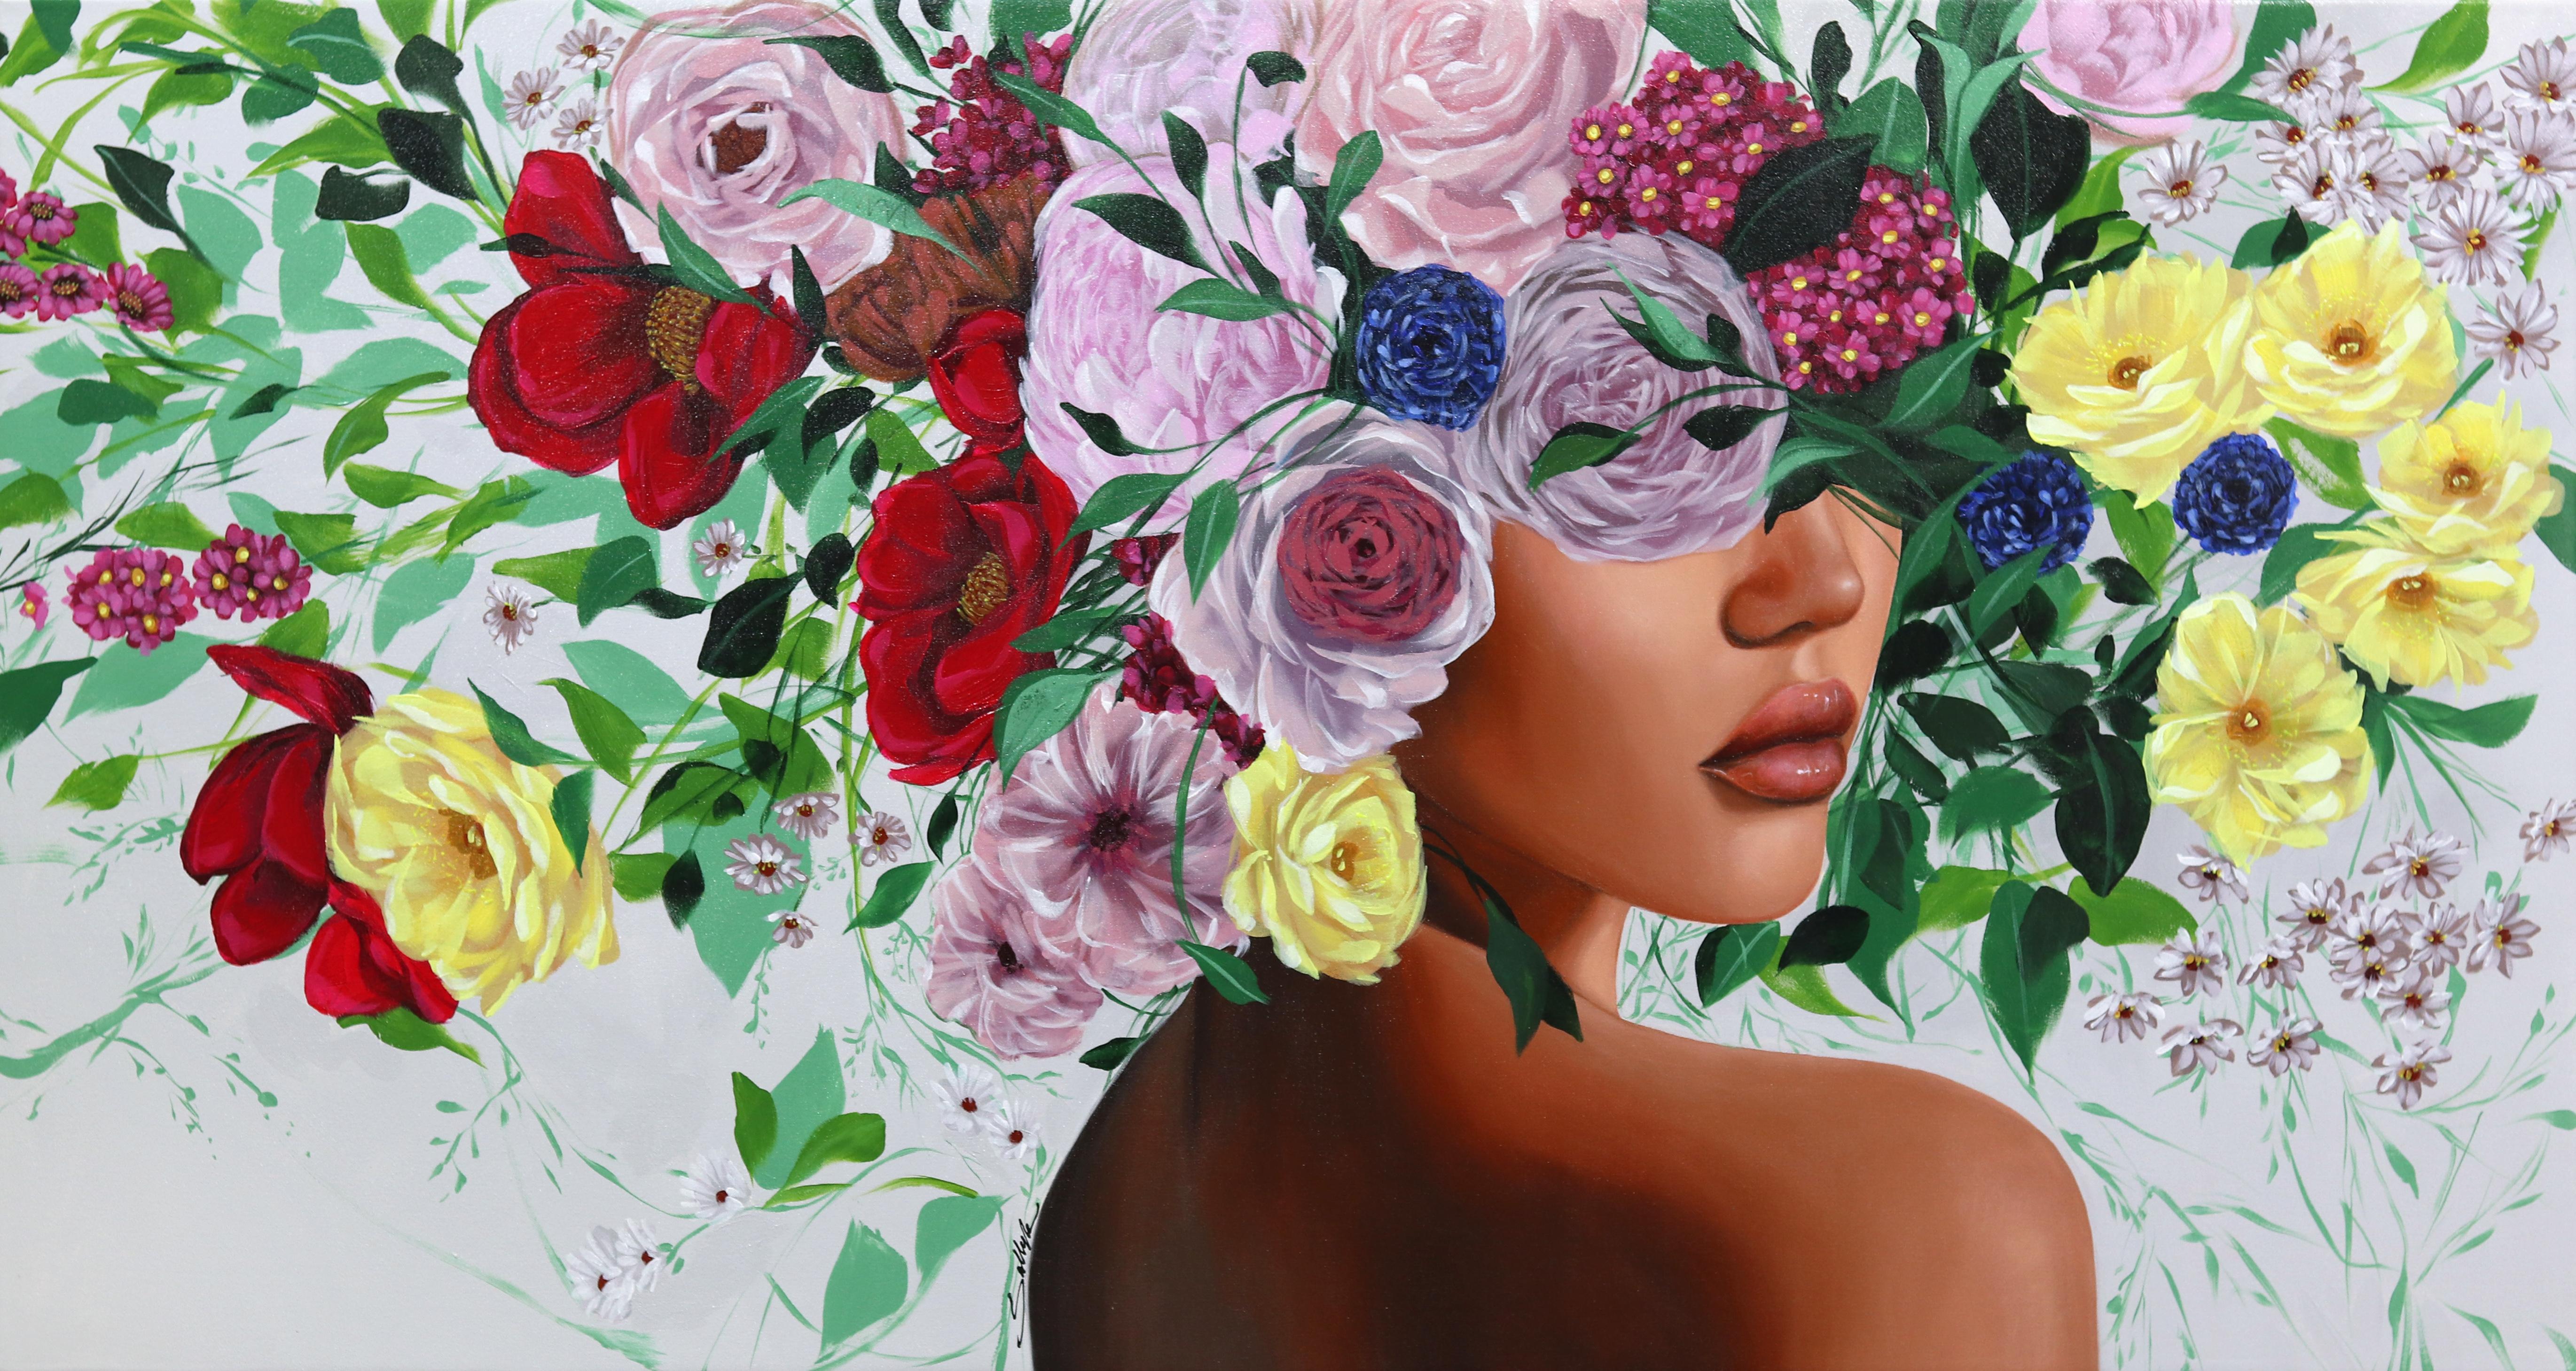 Lebanese American artist Sally K.'s captivating floral portraits are both mesmerizing and empowering. Her pop-realistic paintings are inspired by strong, feminine women, celebrating the individuality and inherent strength of the female experience.